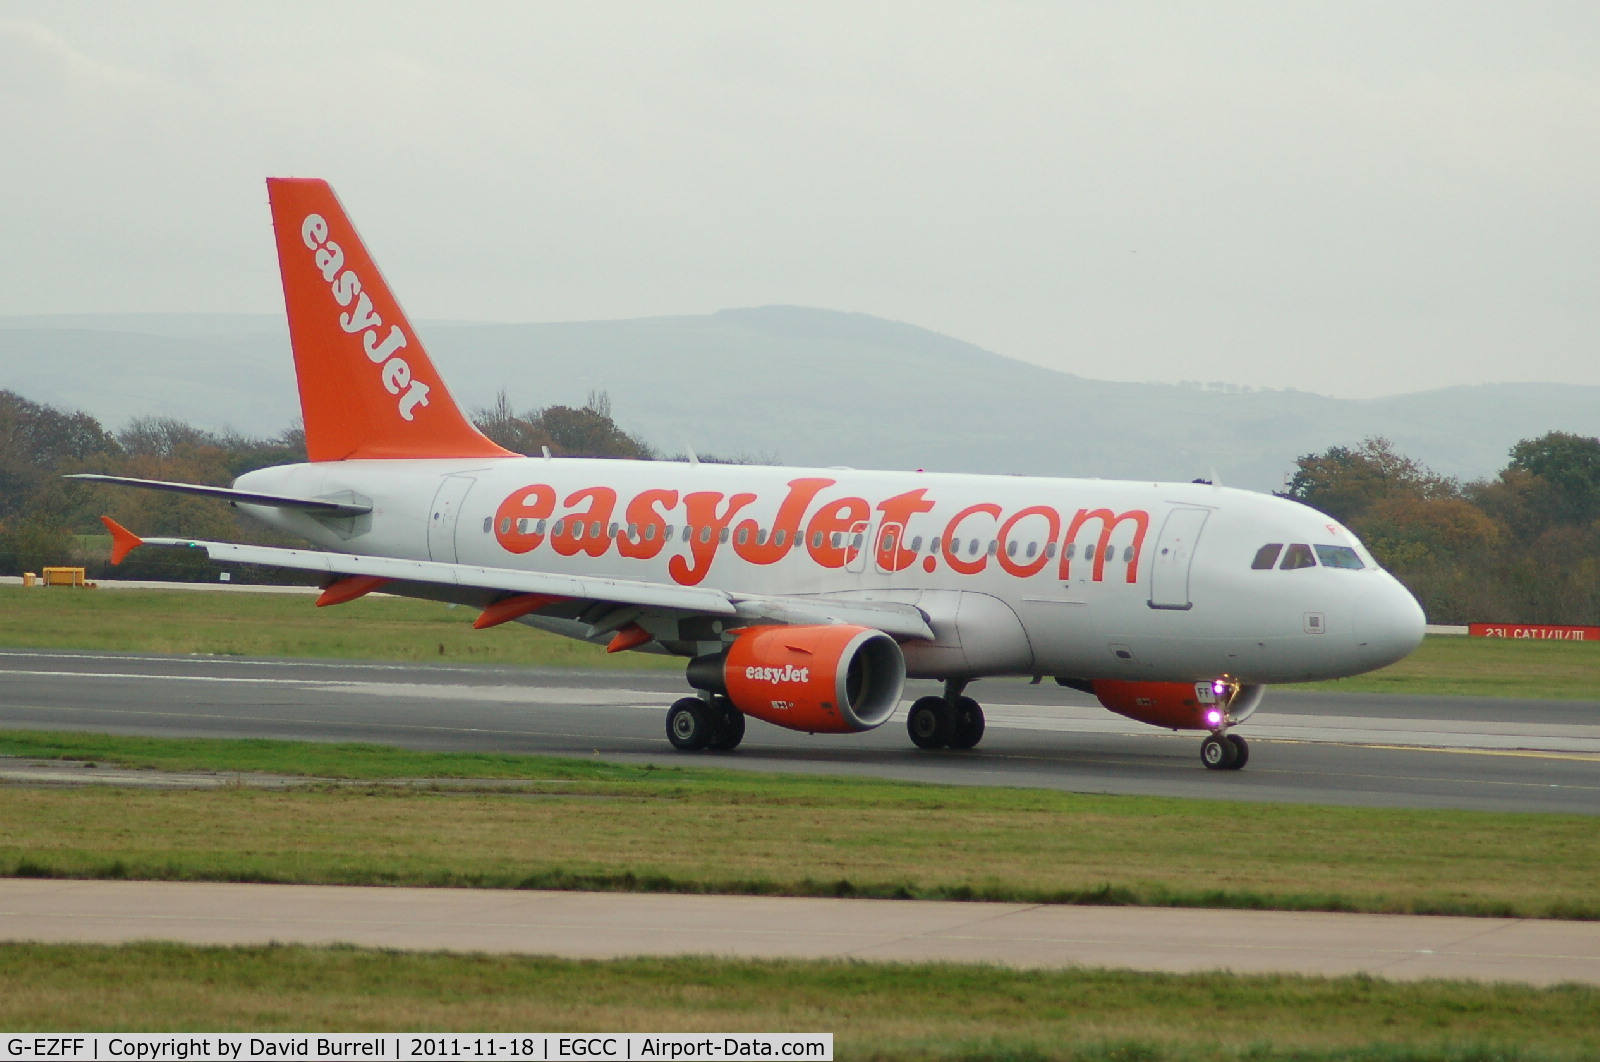 G-EZFF, 2009 Airbus A319-111 C/N 3844, Easyjet Airbus A319-111 taxiing - Manchester Airport